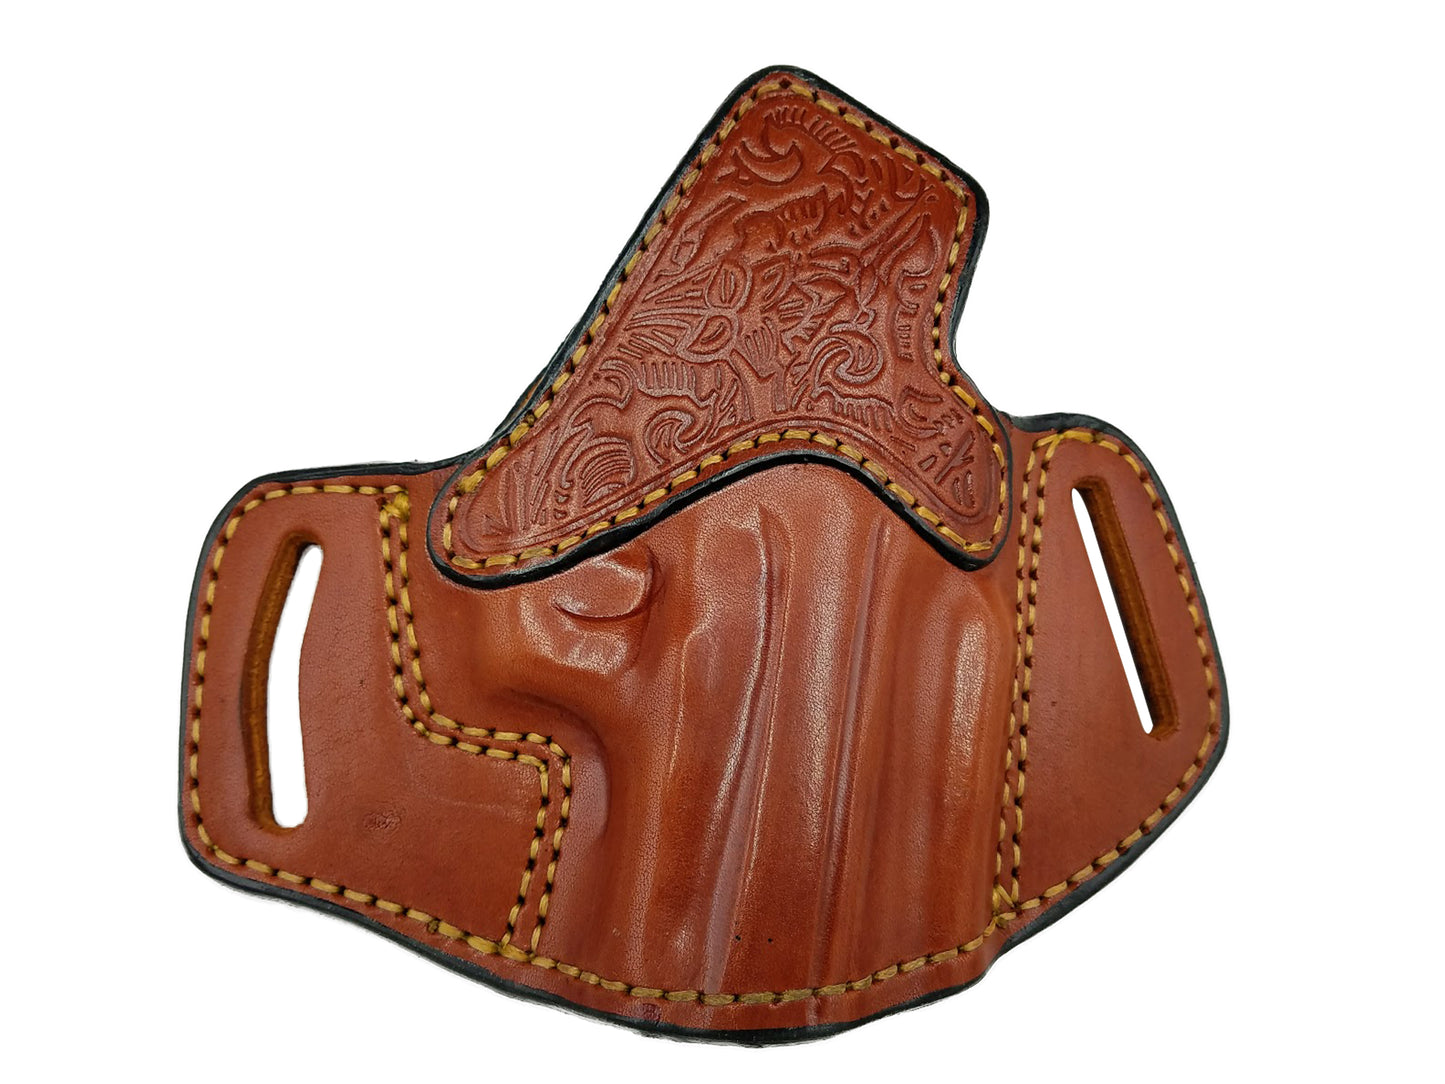 Smith & Wesson CSX Open Top Premium Concealable Leather Belt Holster